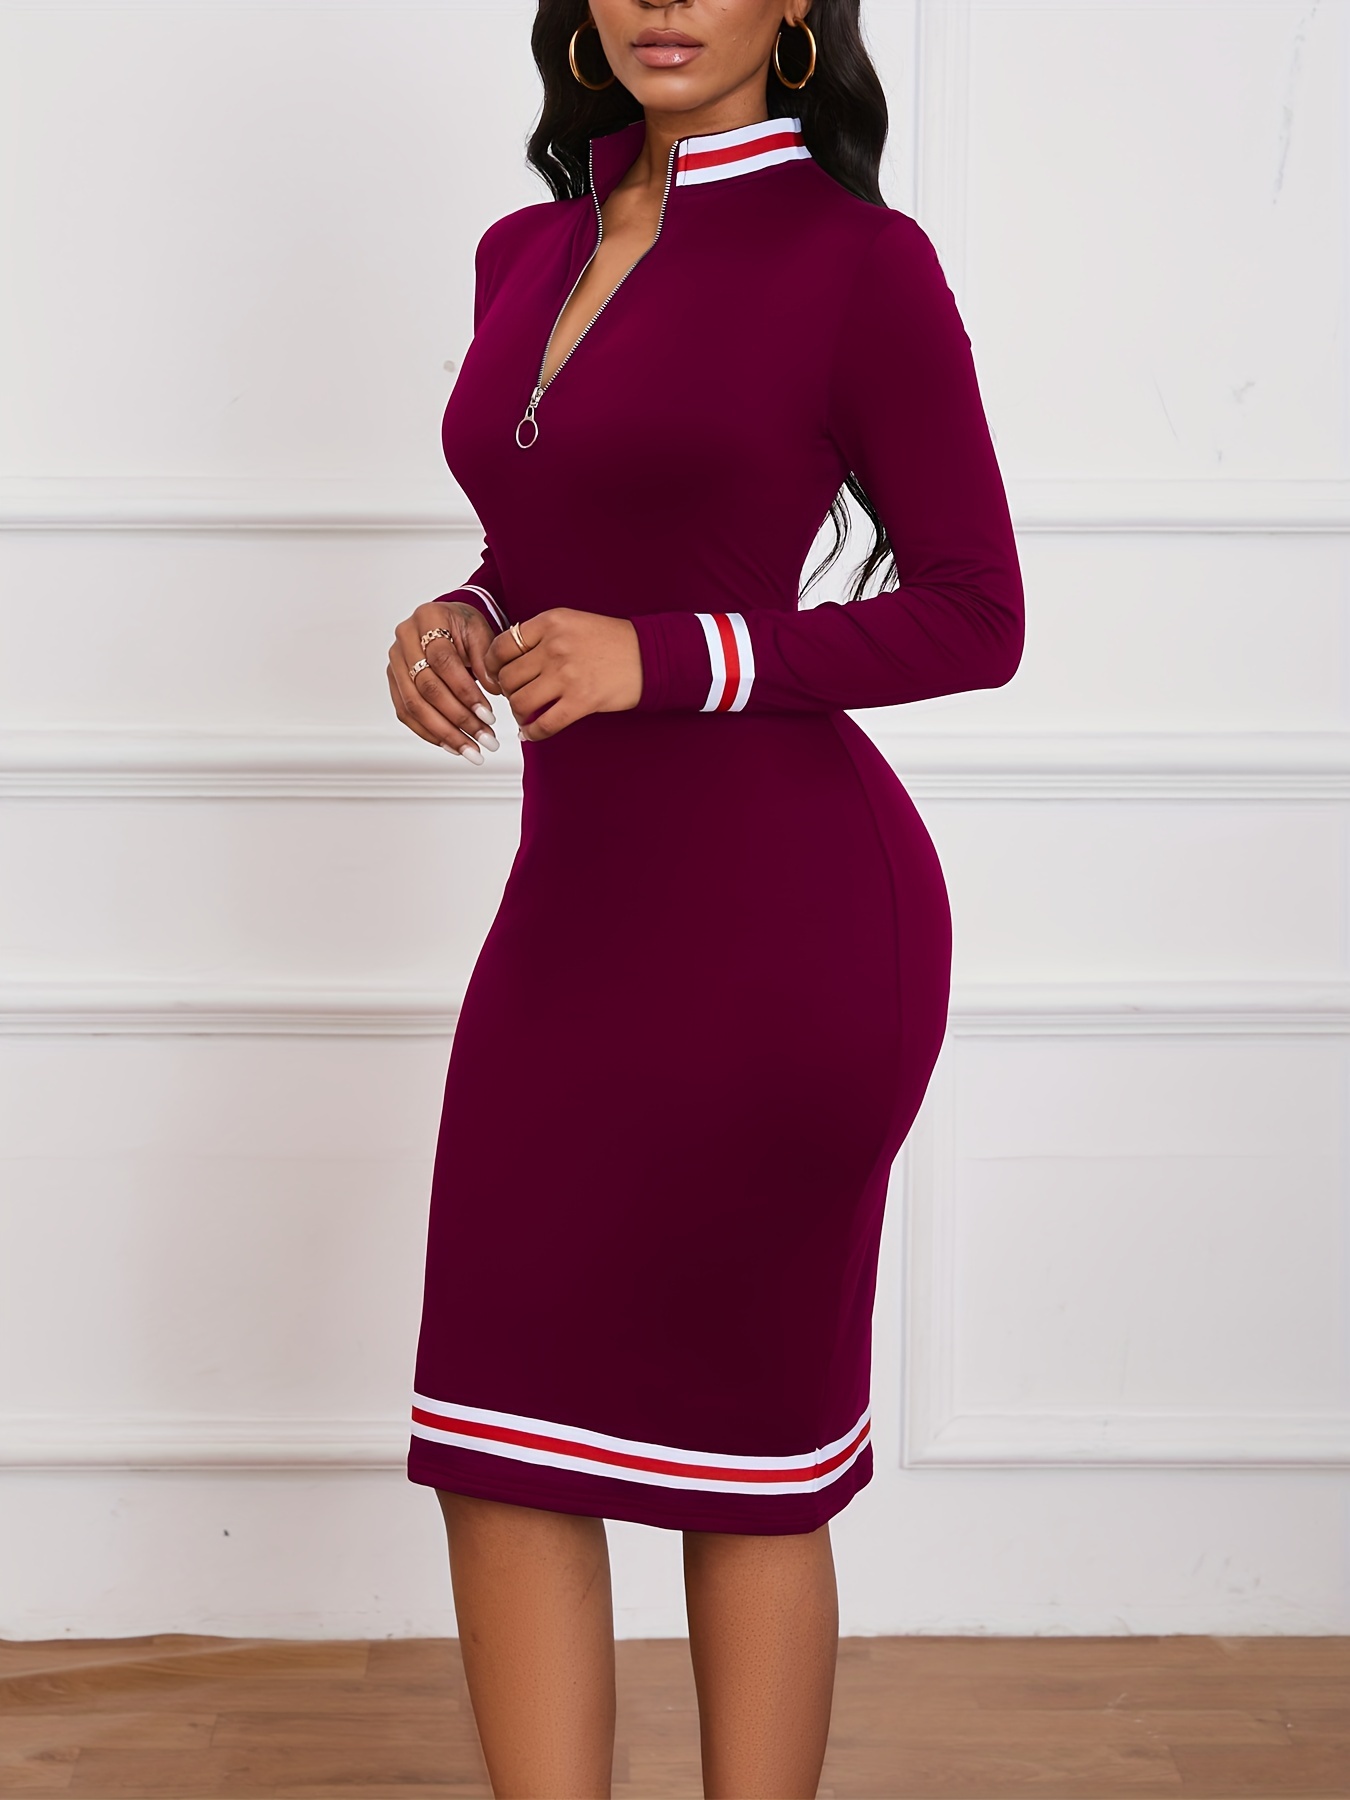 zip up striped print dress casual long sleeve bodycon midi dress womens clothing details 13